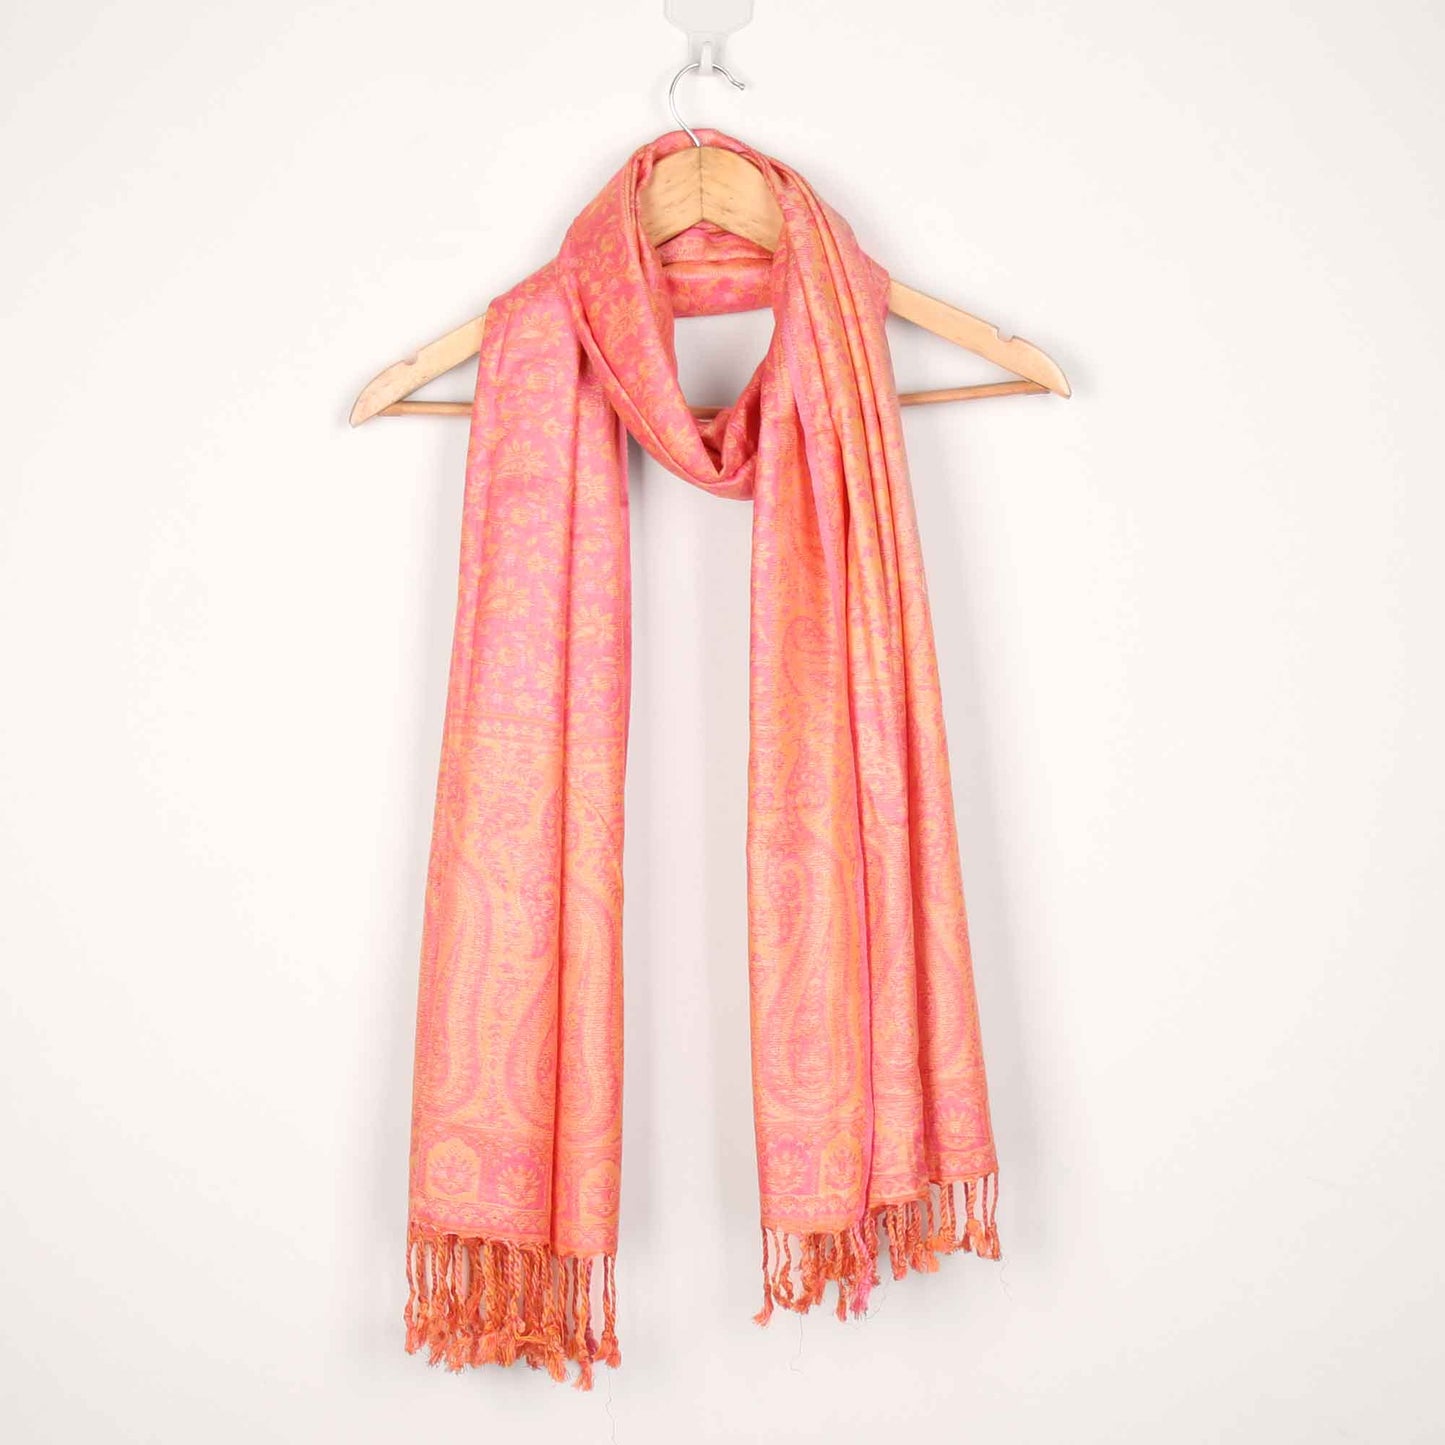 Stole,The Sultani Art Reversible Stole in Pink - Cippele Multi Store